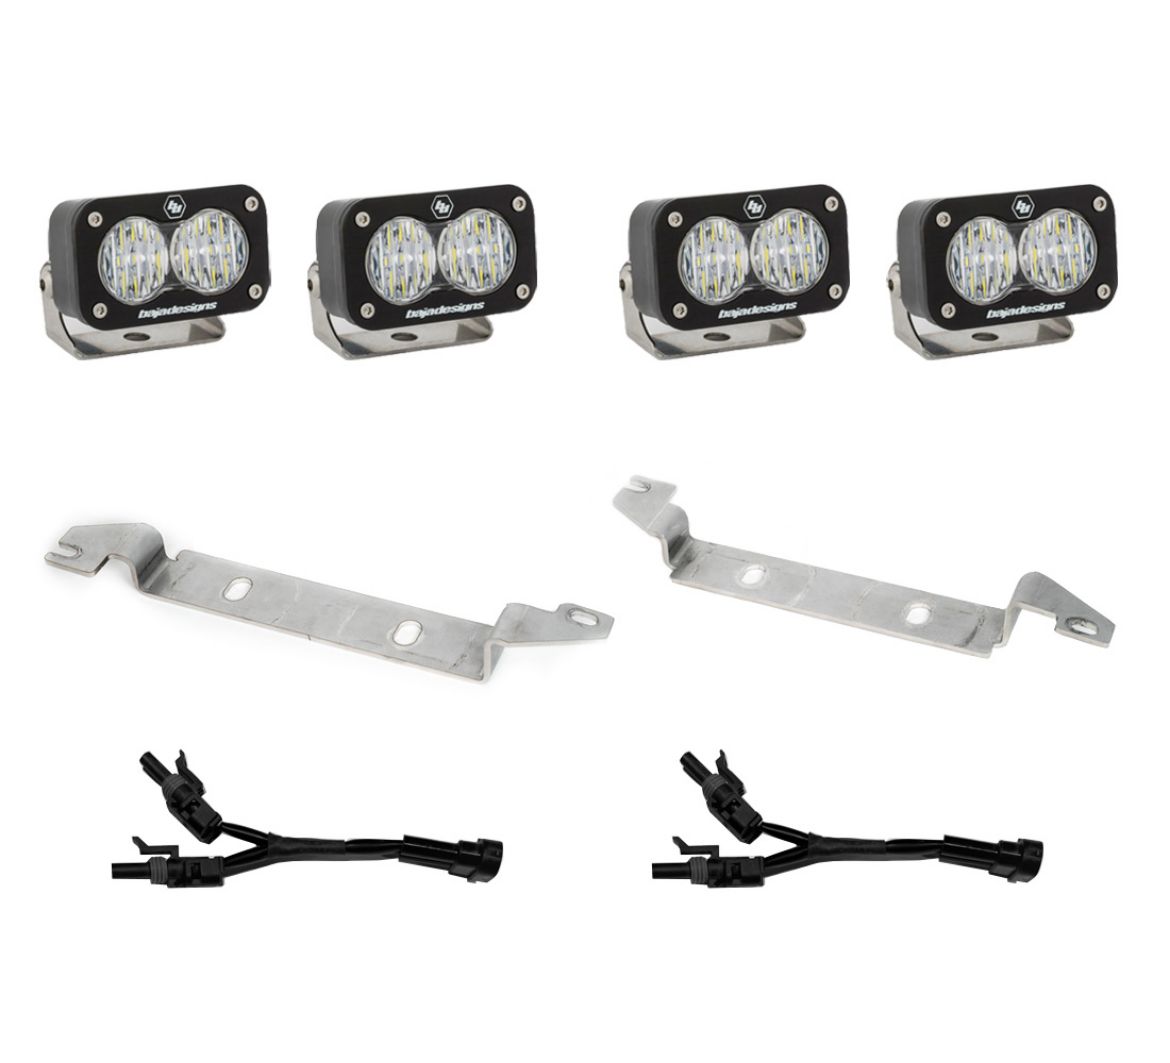 Picture of 2022 Toyota Tundra S2 Sport OEM Fog Light Replacement Kit Baja Designs